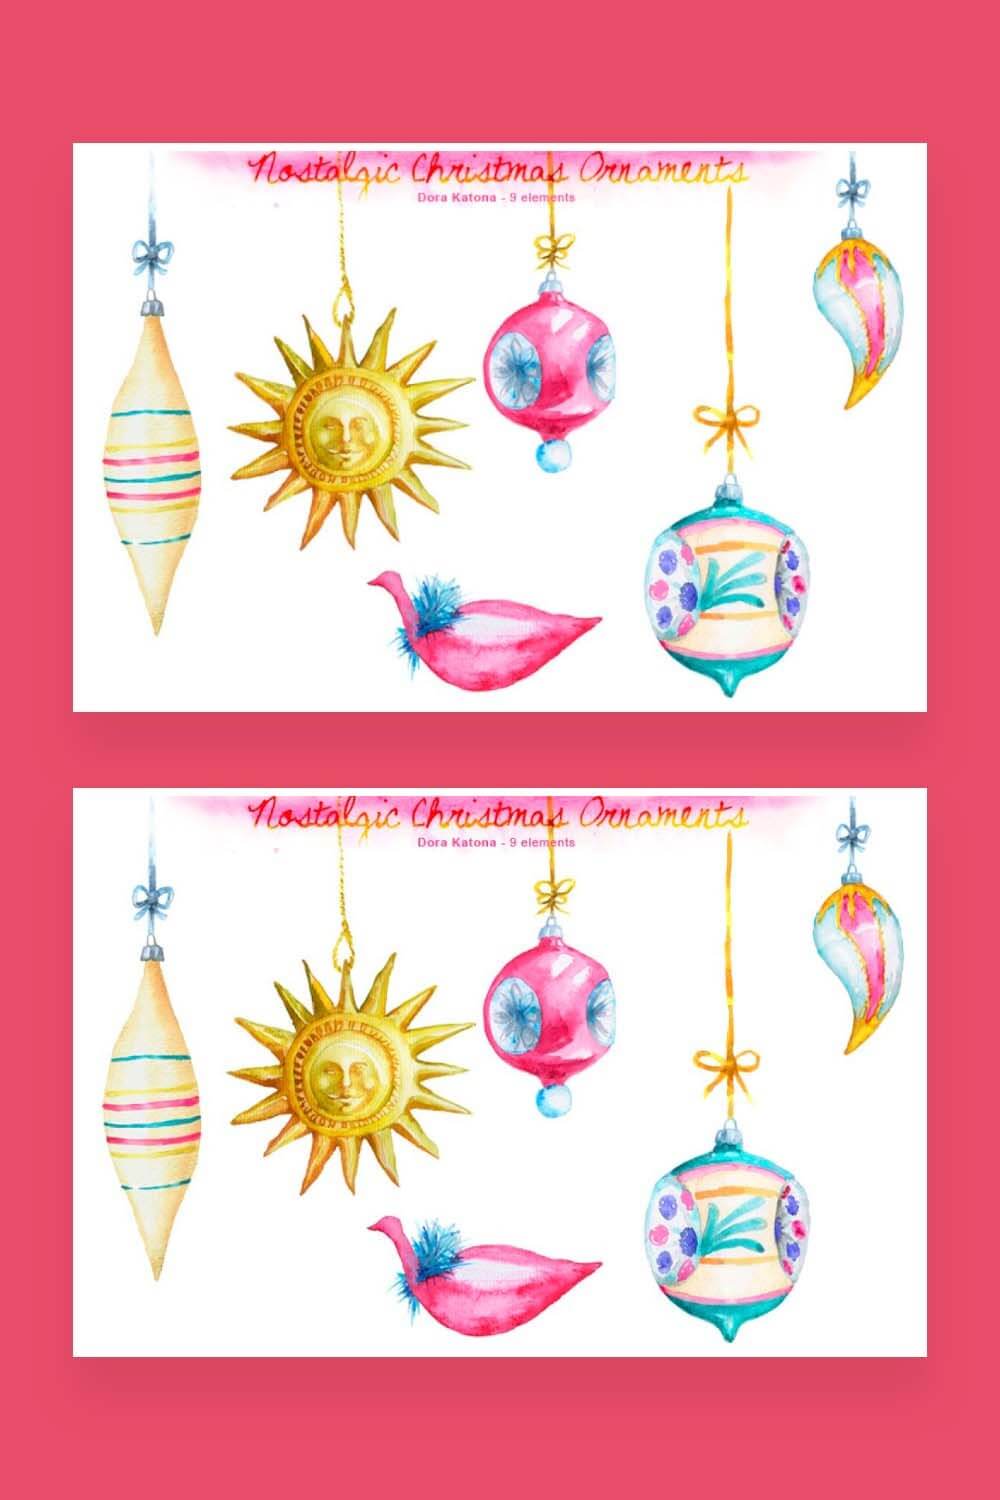 Old Christmas decorations on two drawings with a pink background.